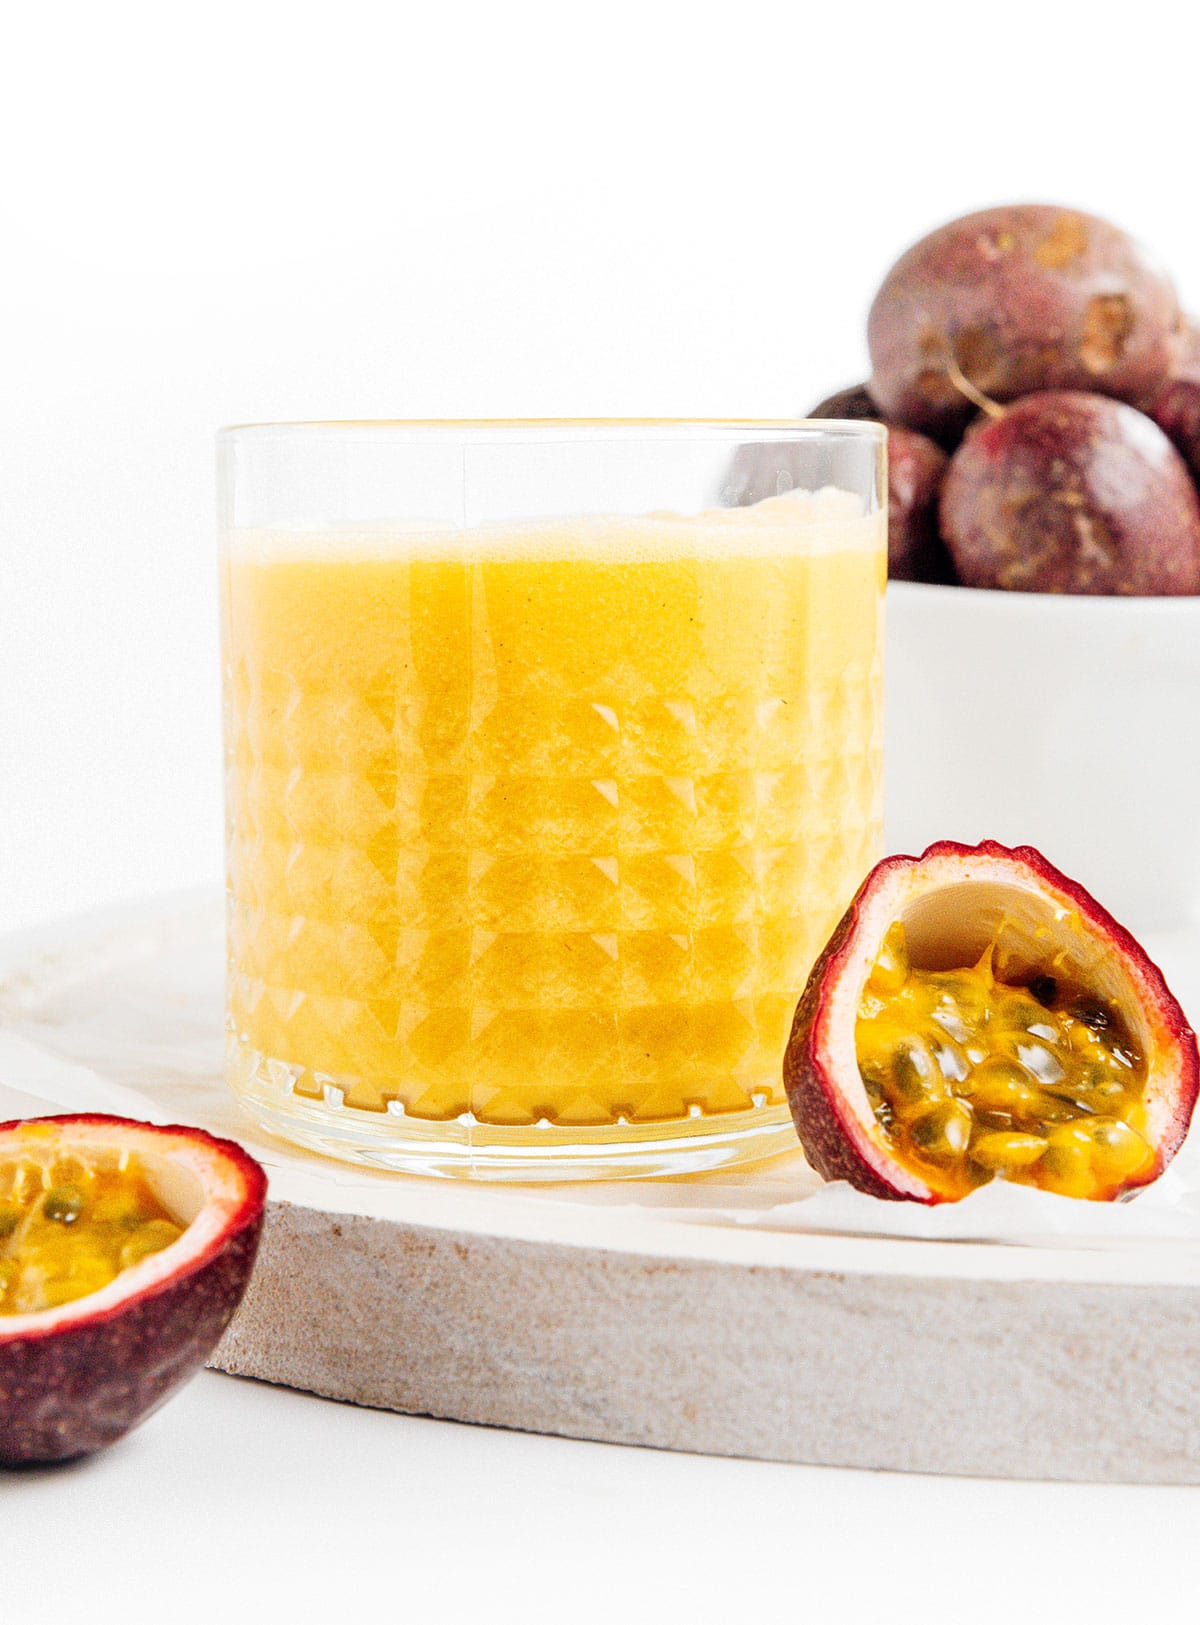 A small glass of homemade passion fruit juice next to cut open passion fruit.